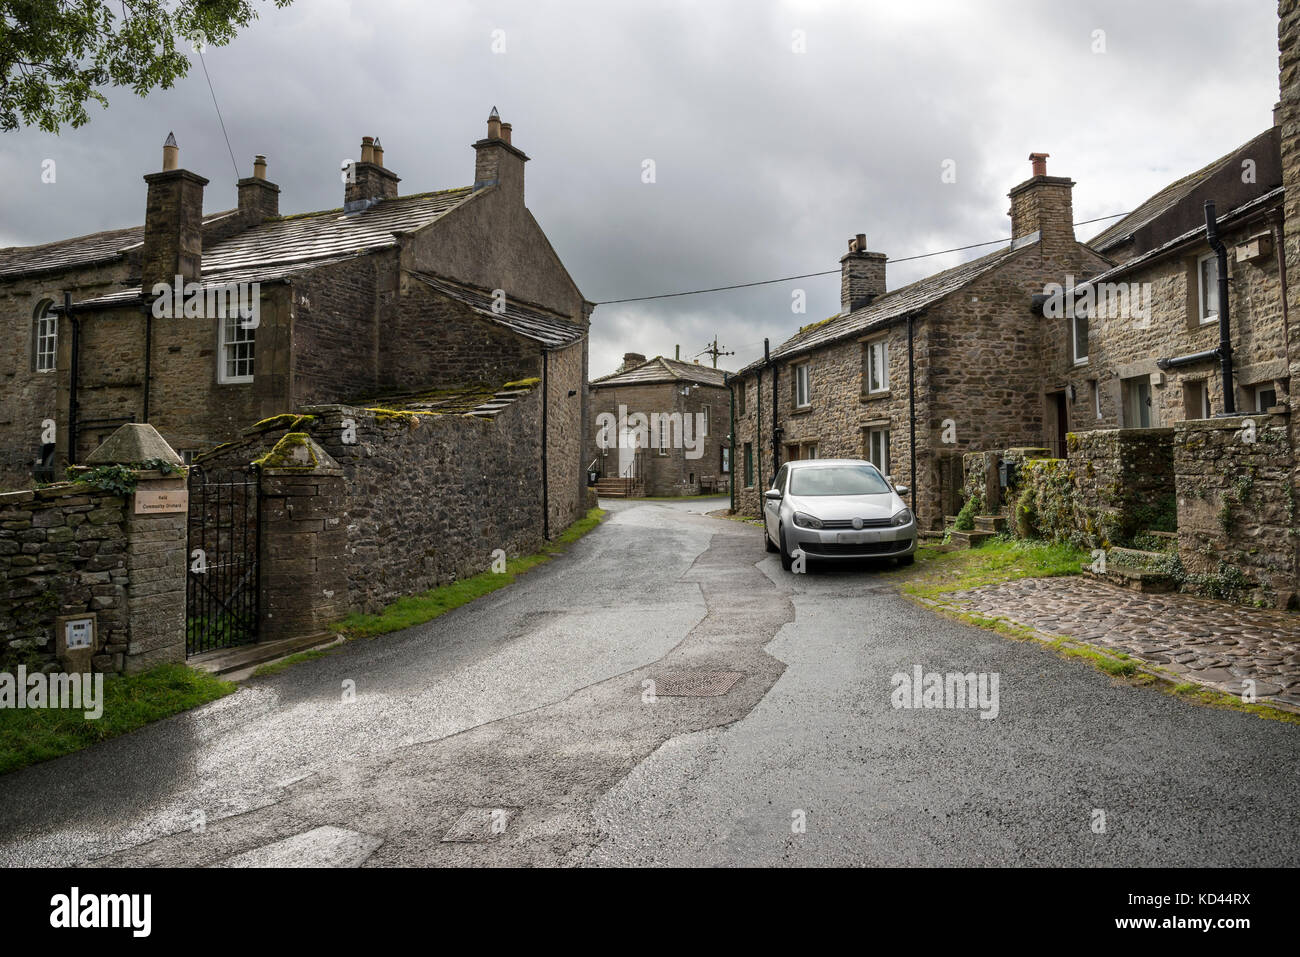 The picturesque village of Keld in Upper Swaledale, North Yorkshire, England. Stock Photo